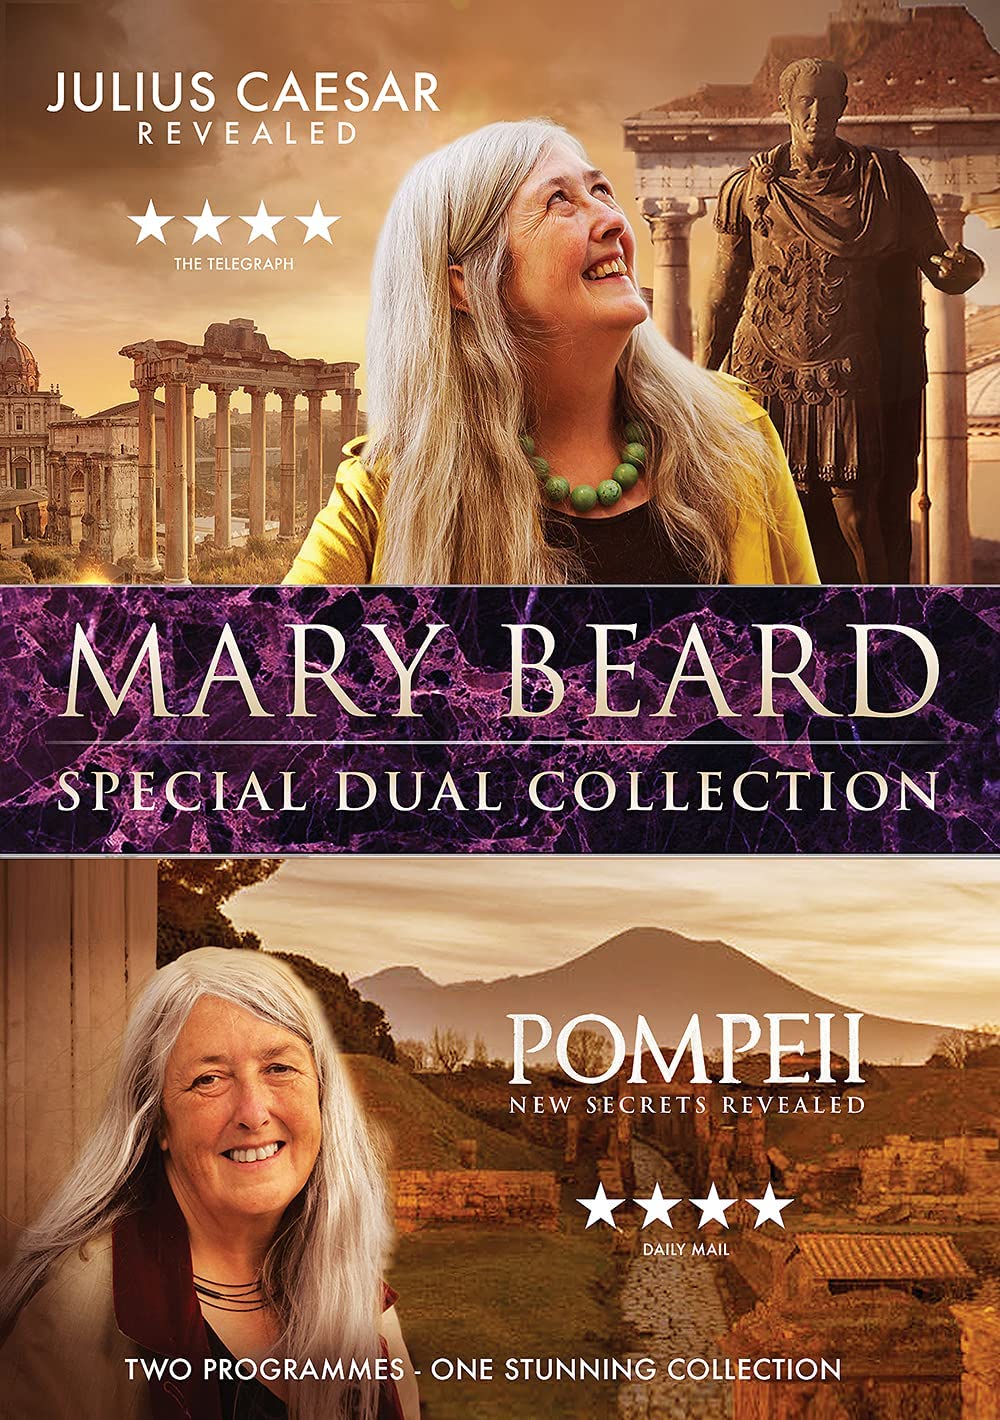 Mary Beard Special Dual Collection – Julius Caesar Revealed & Pompeii New Secrets Revealed [DVD]